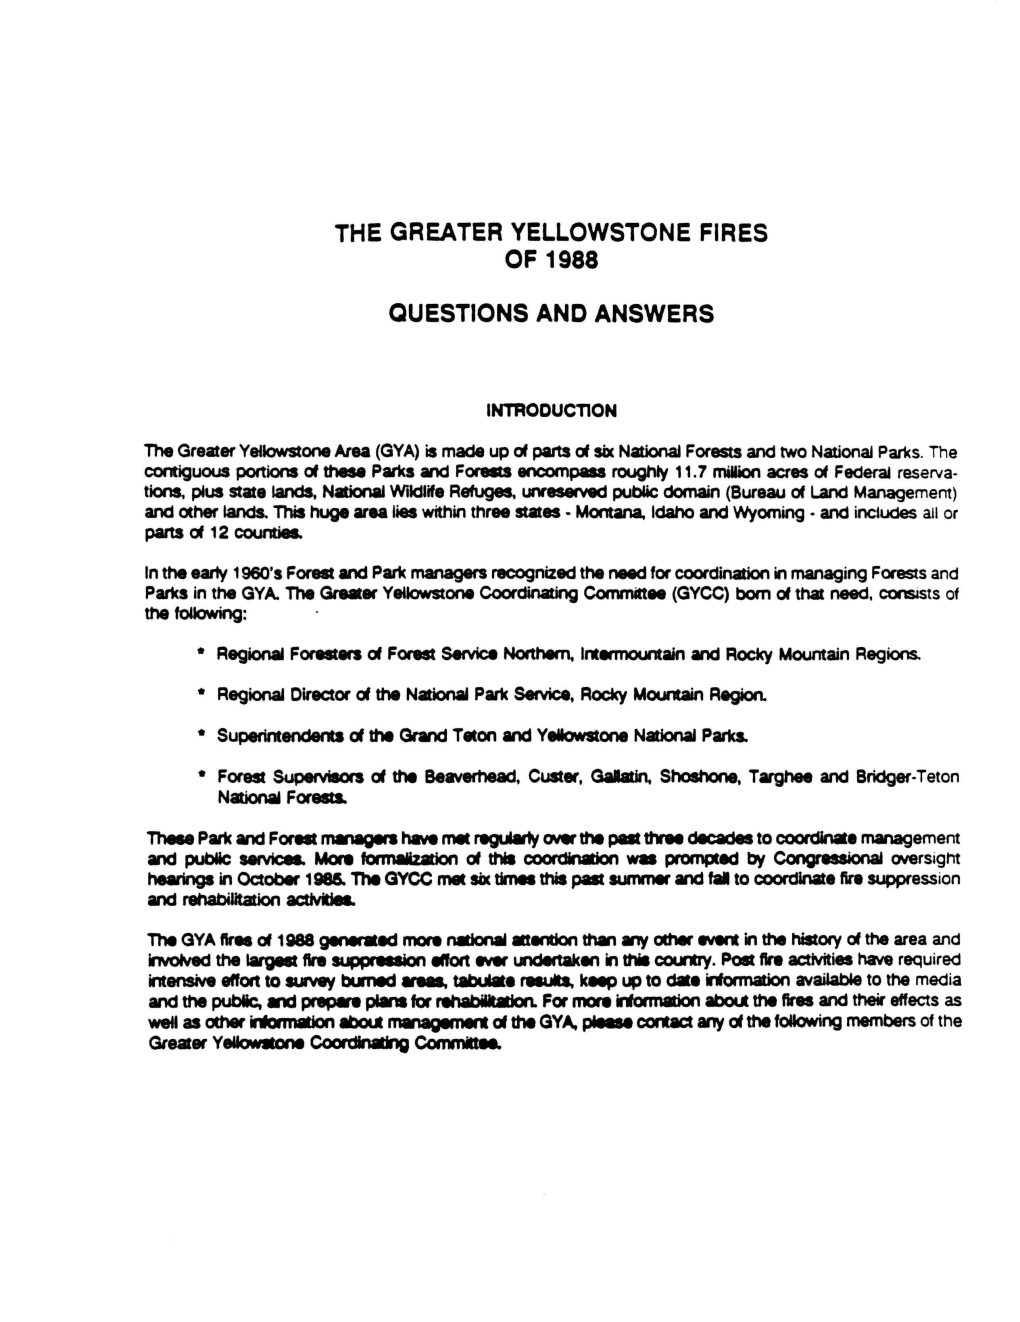 The Greater Yellowstone Fires of 1988 Questions And